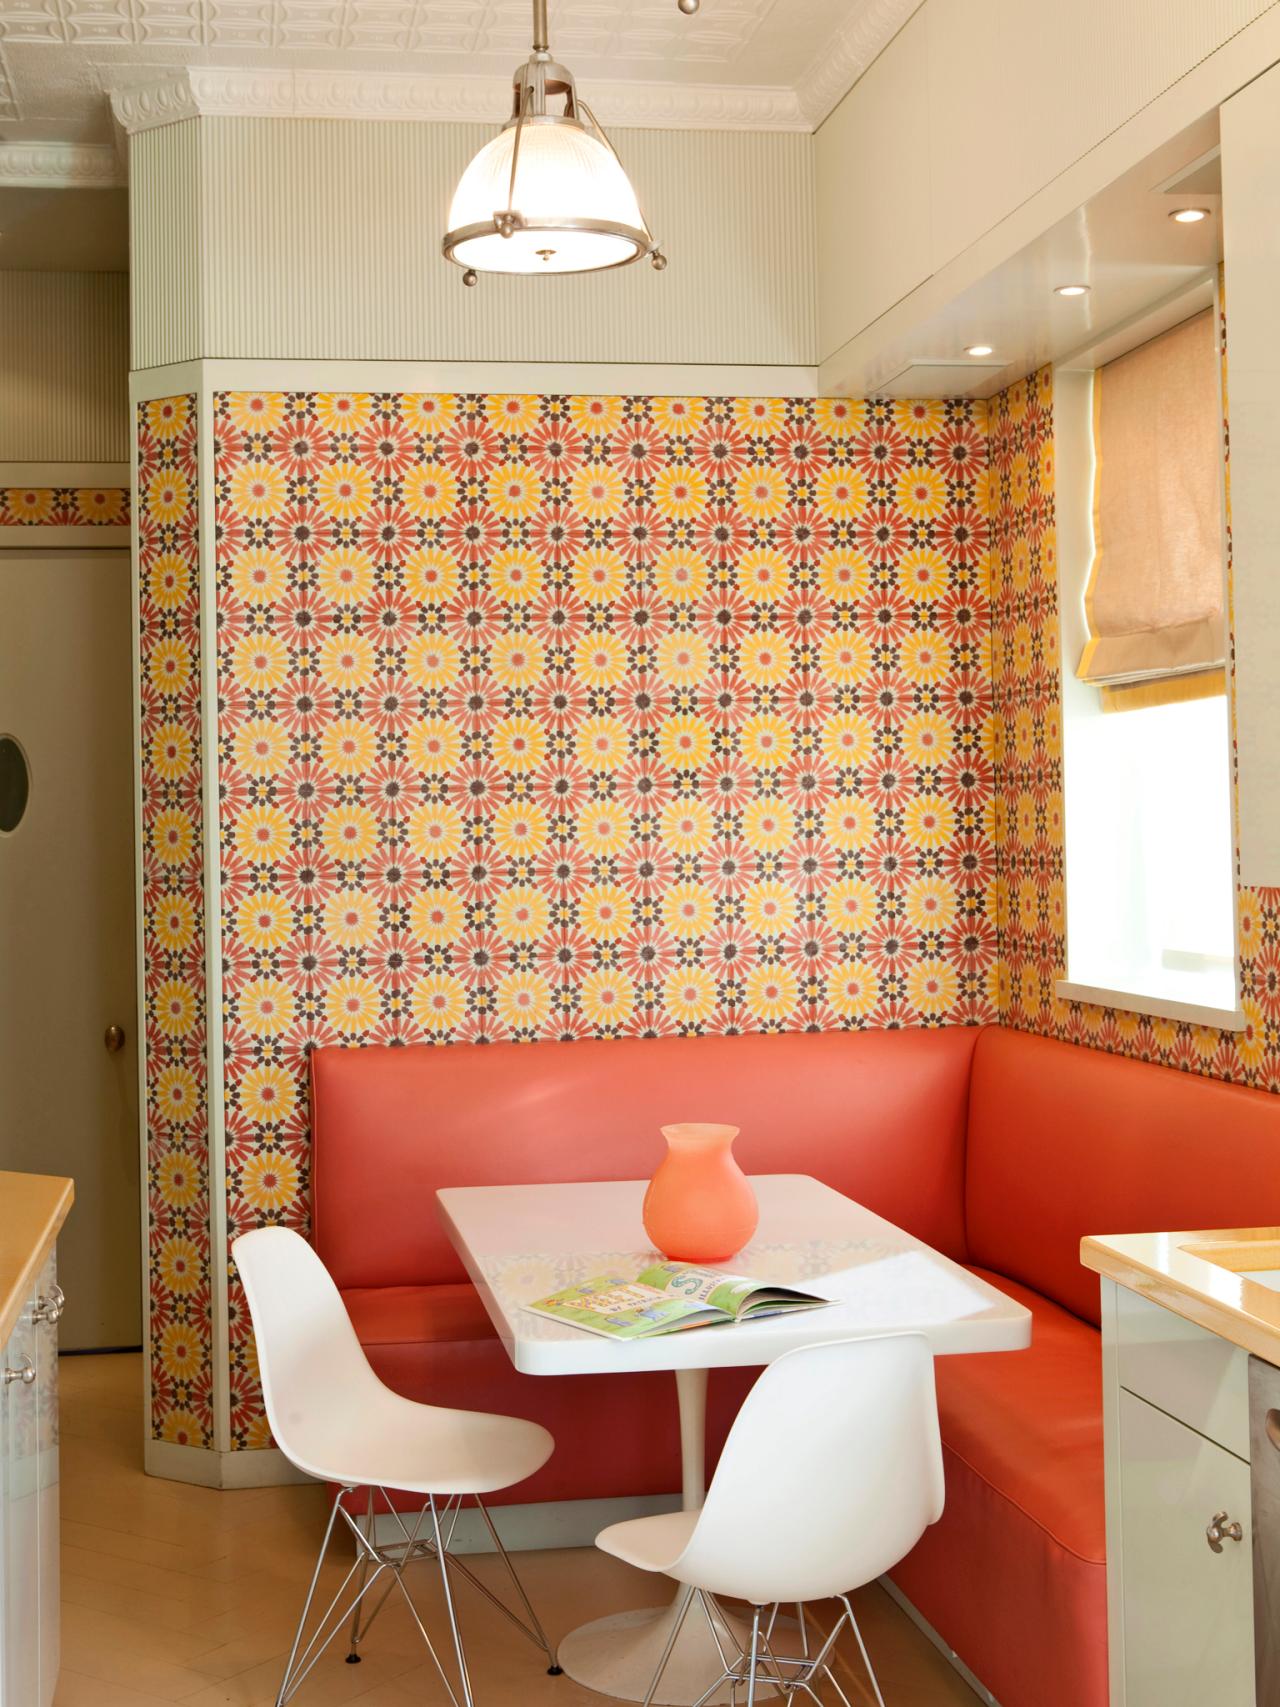 Midcentury Modern Dining Room With Floral Wallpaper - Breakfast Nook Banquette Mid Century - HD Wallpaper 